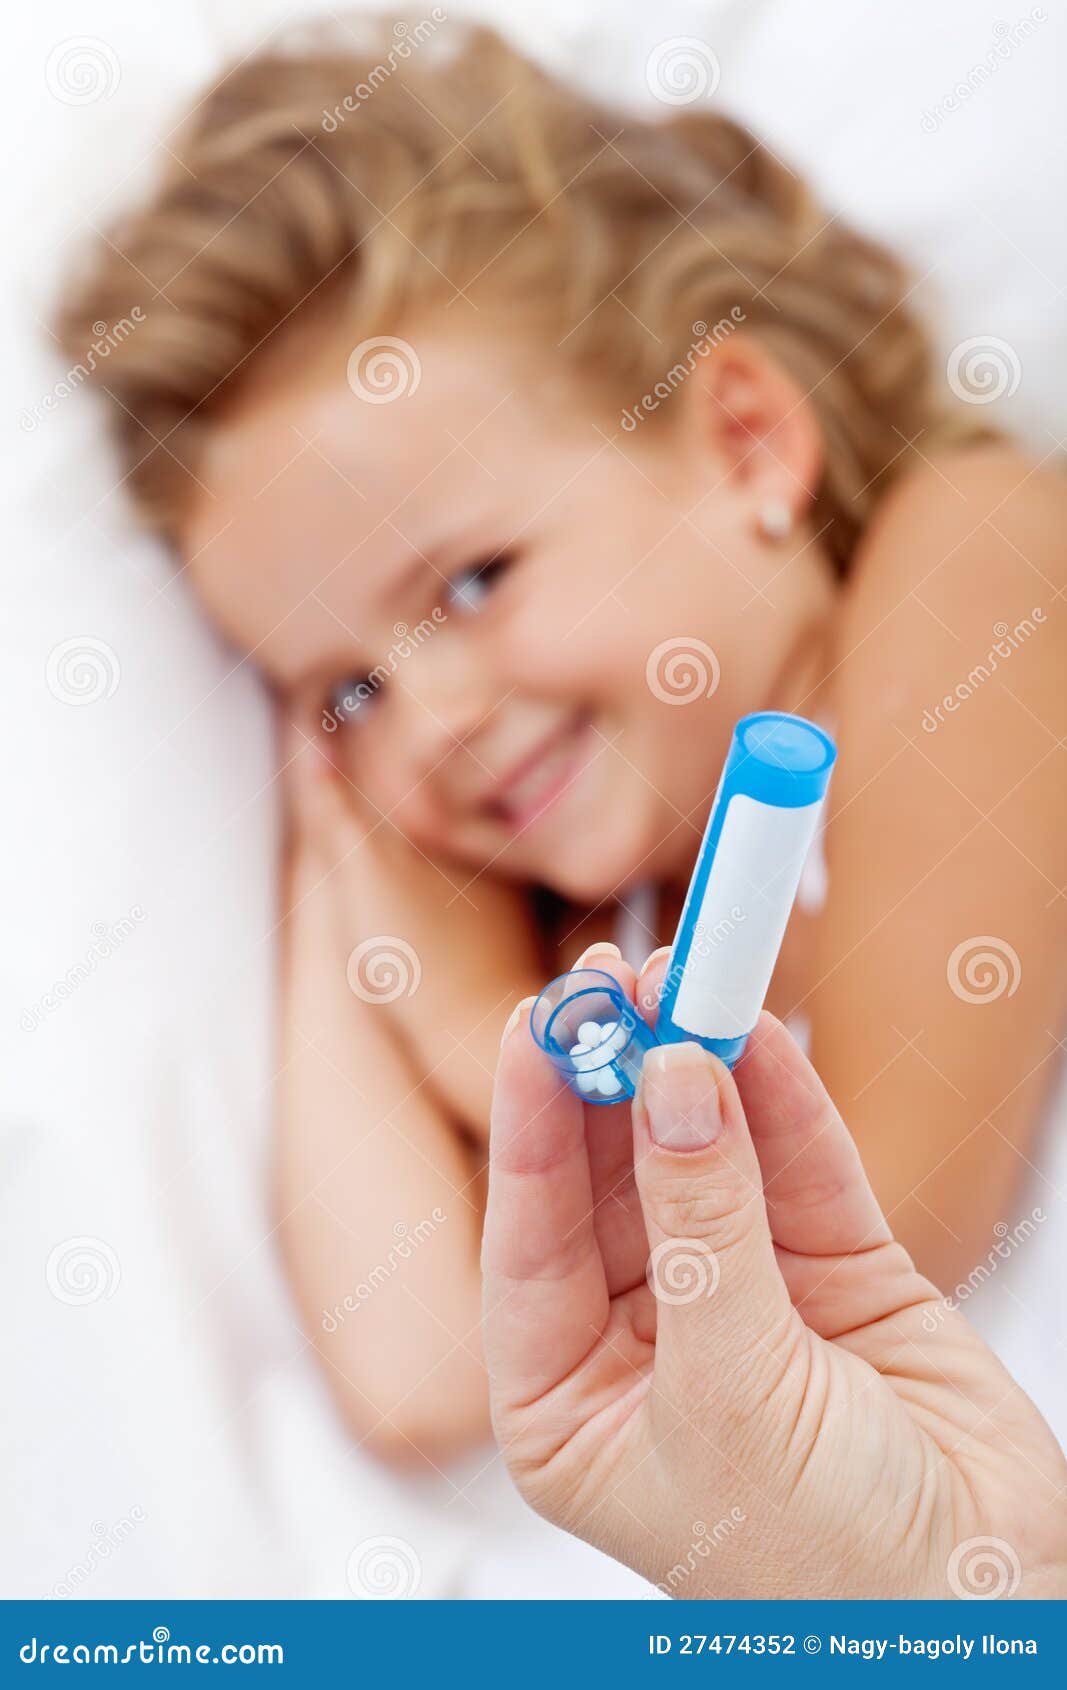 little girl receiving homeopathic medication